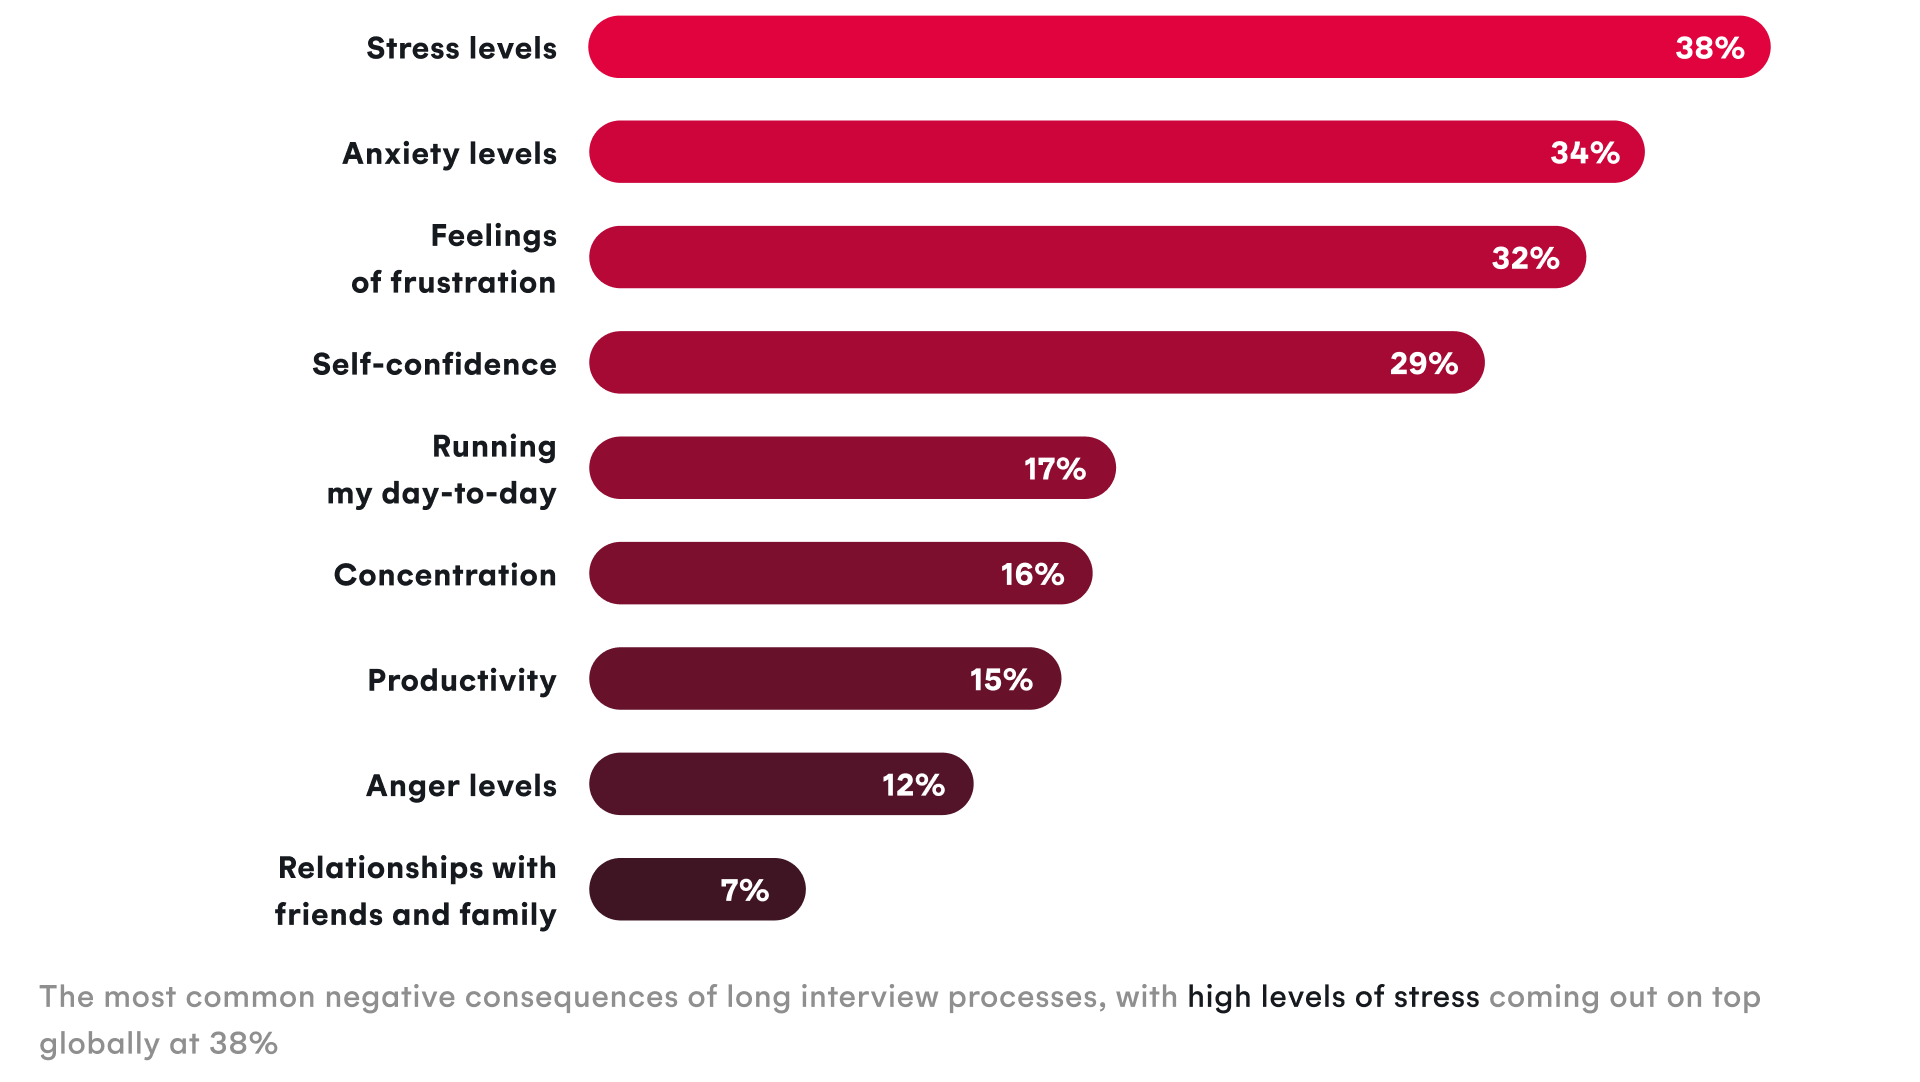 Chart illustrating negative consequences of a long interview process